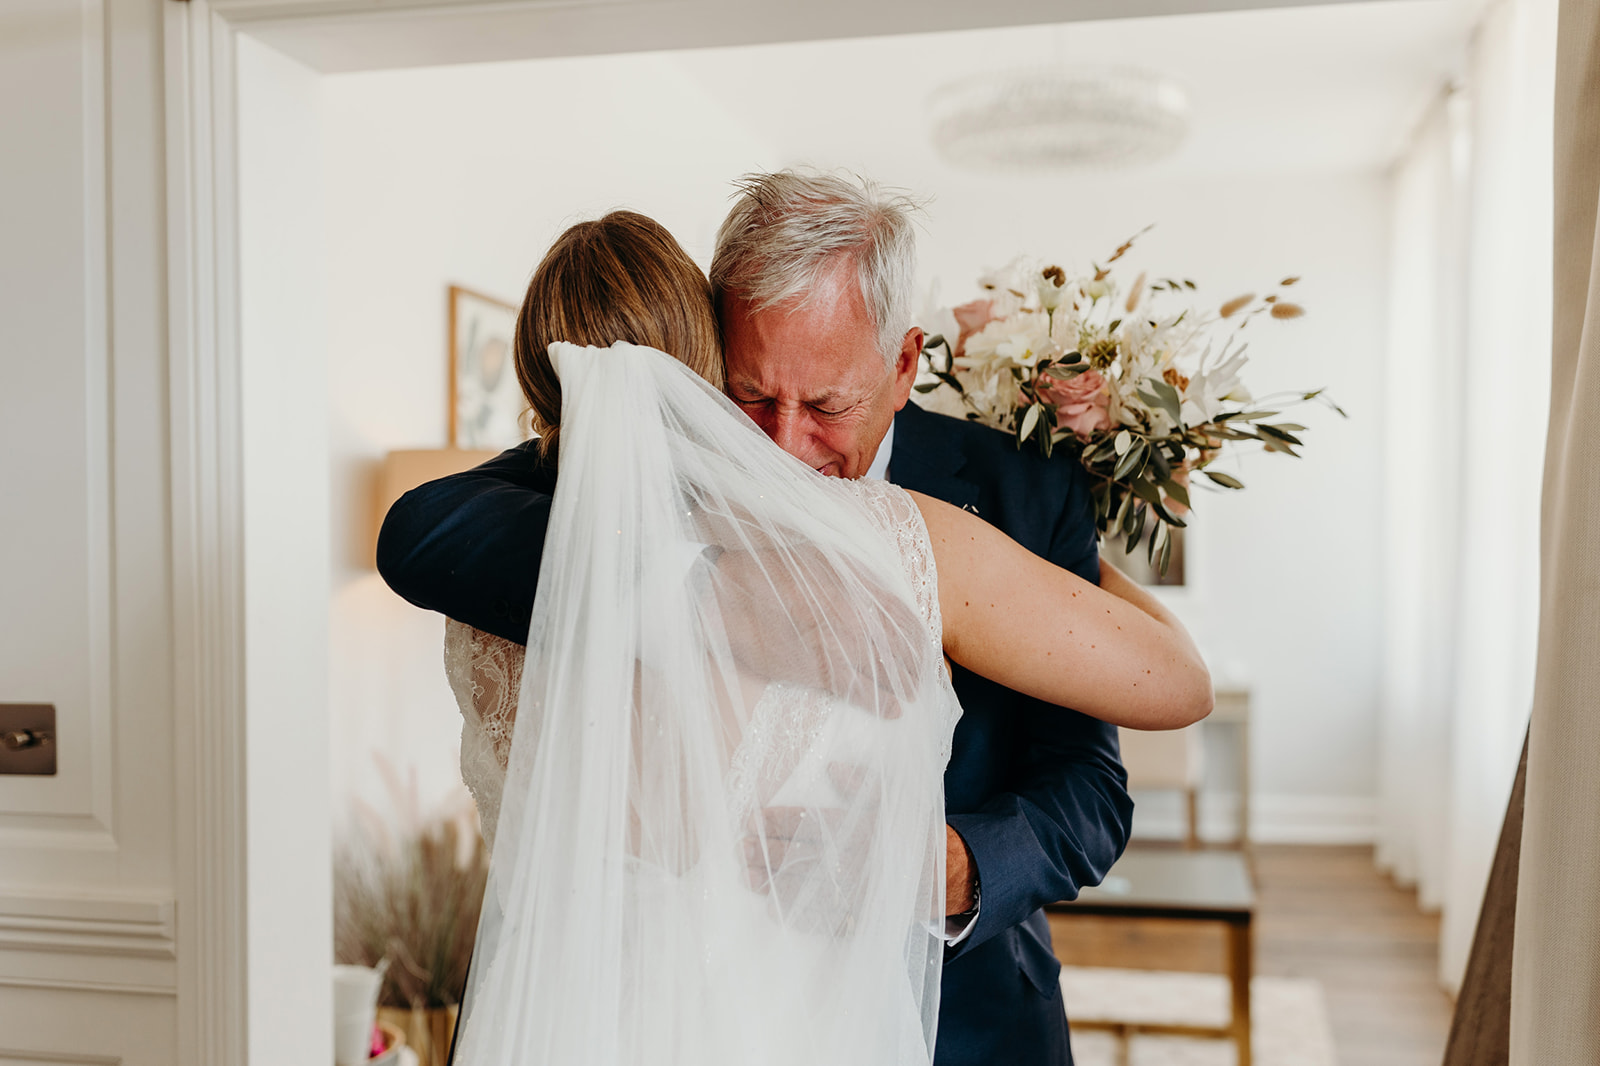 Tender embrace captured as a father hugs his bride daughter in a warmly lit room, both emotional as he fights back tears